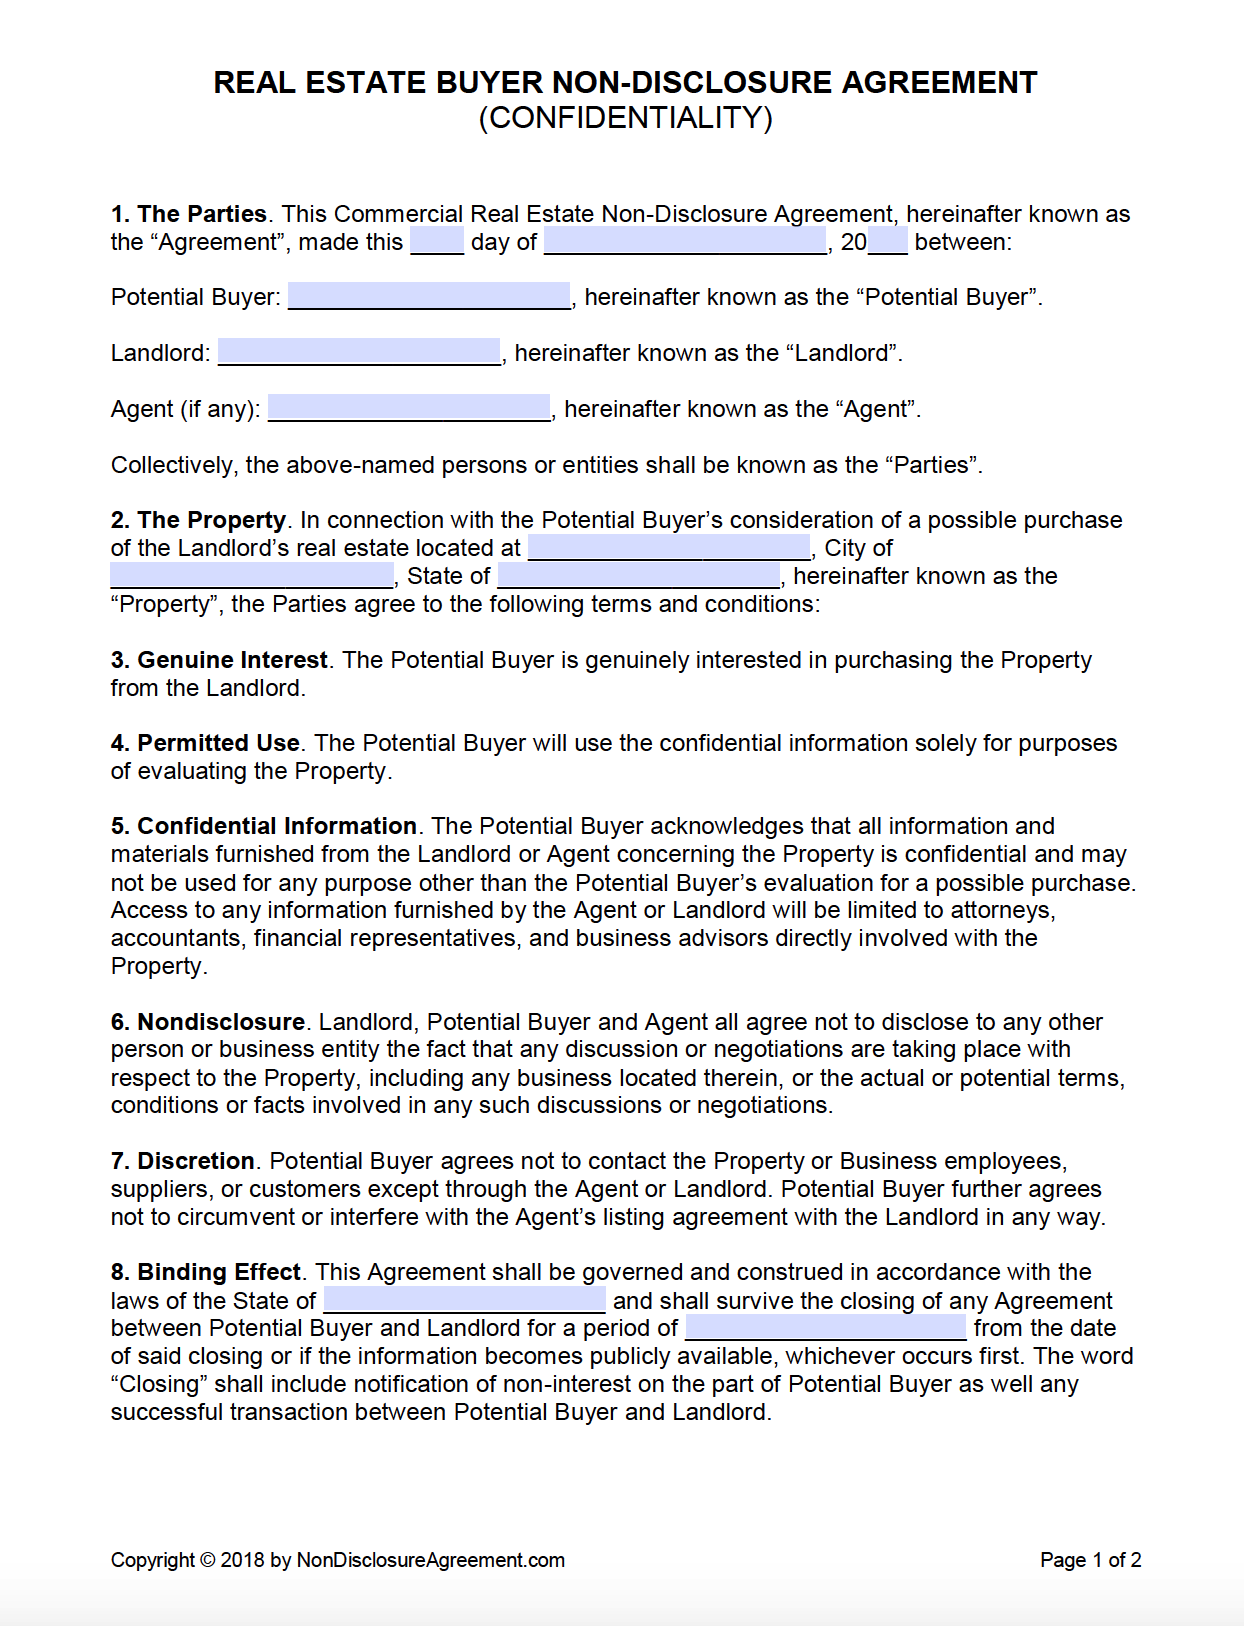 Free Real Estate Buyer (Confidentiality) Non-Disclosure Agreement Inside financial confidentiality agreement template